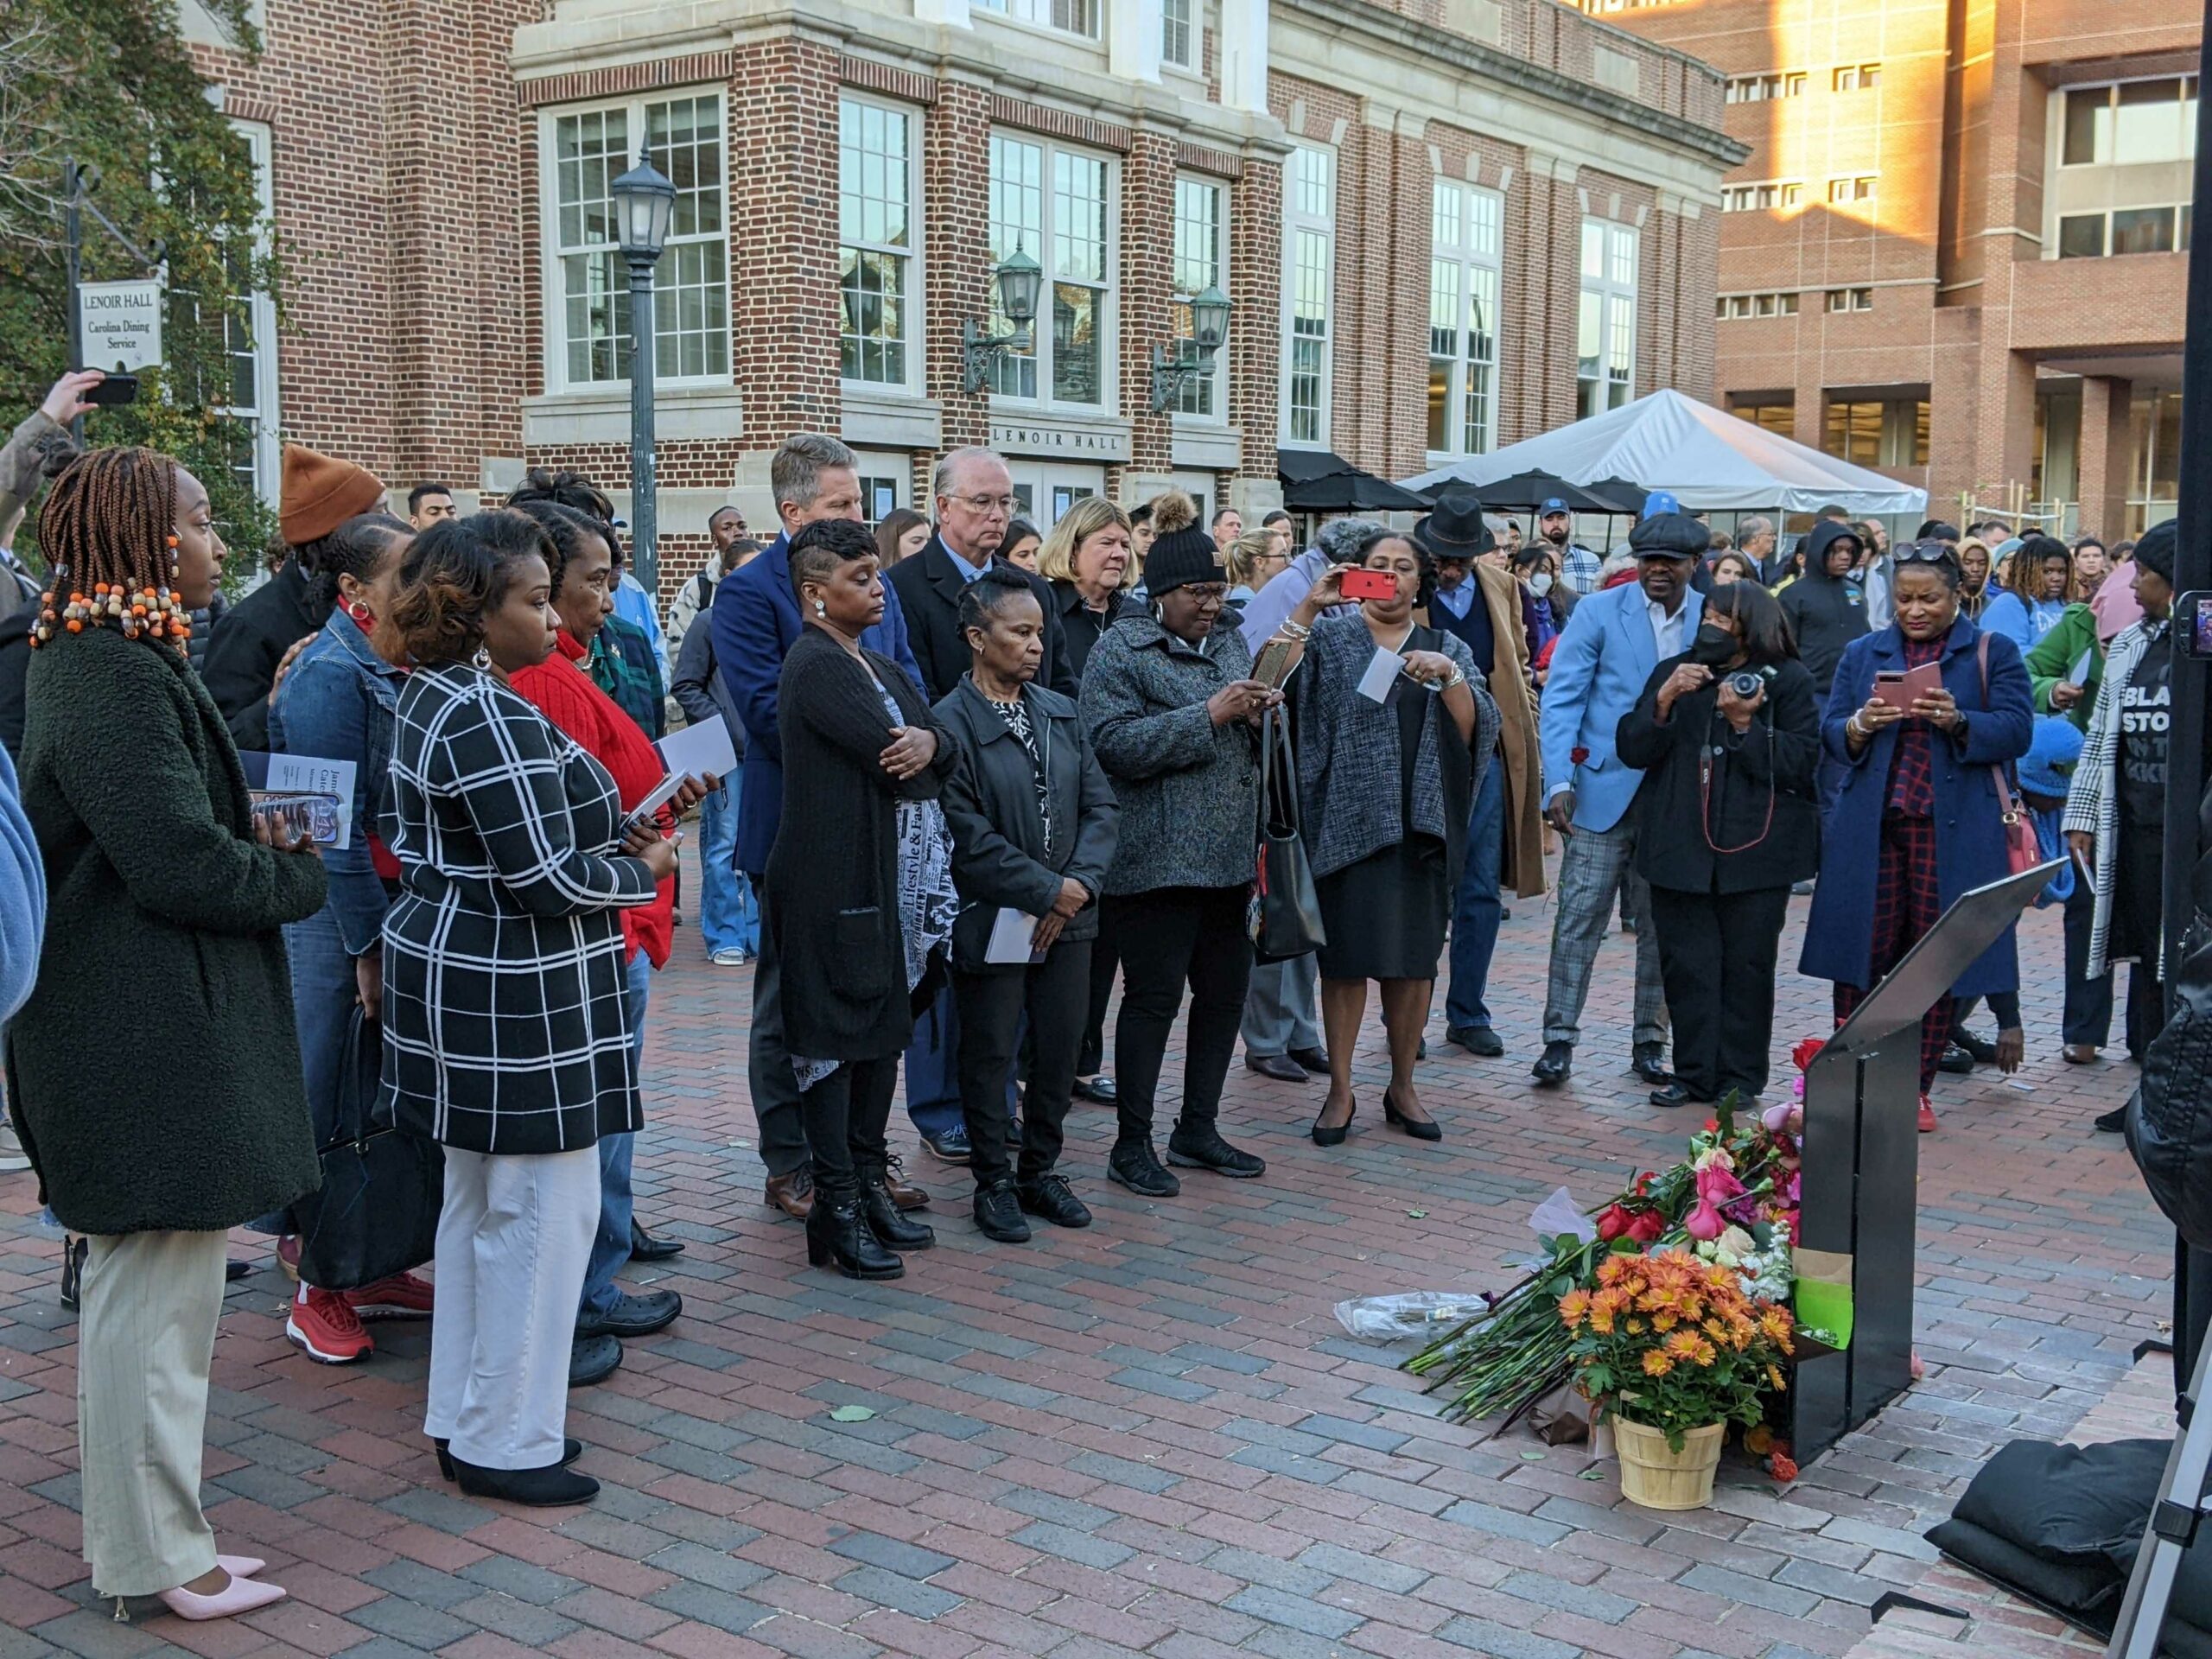 UNC Installs, Dedicates a Permanent Memorial to James Cates 52 Years After Murder